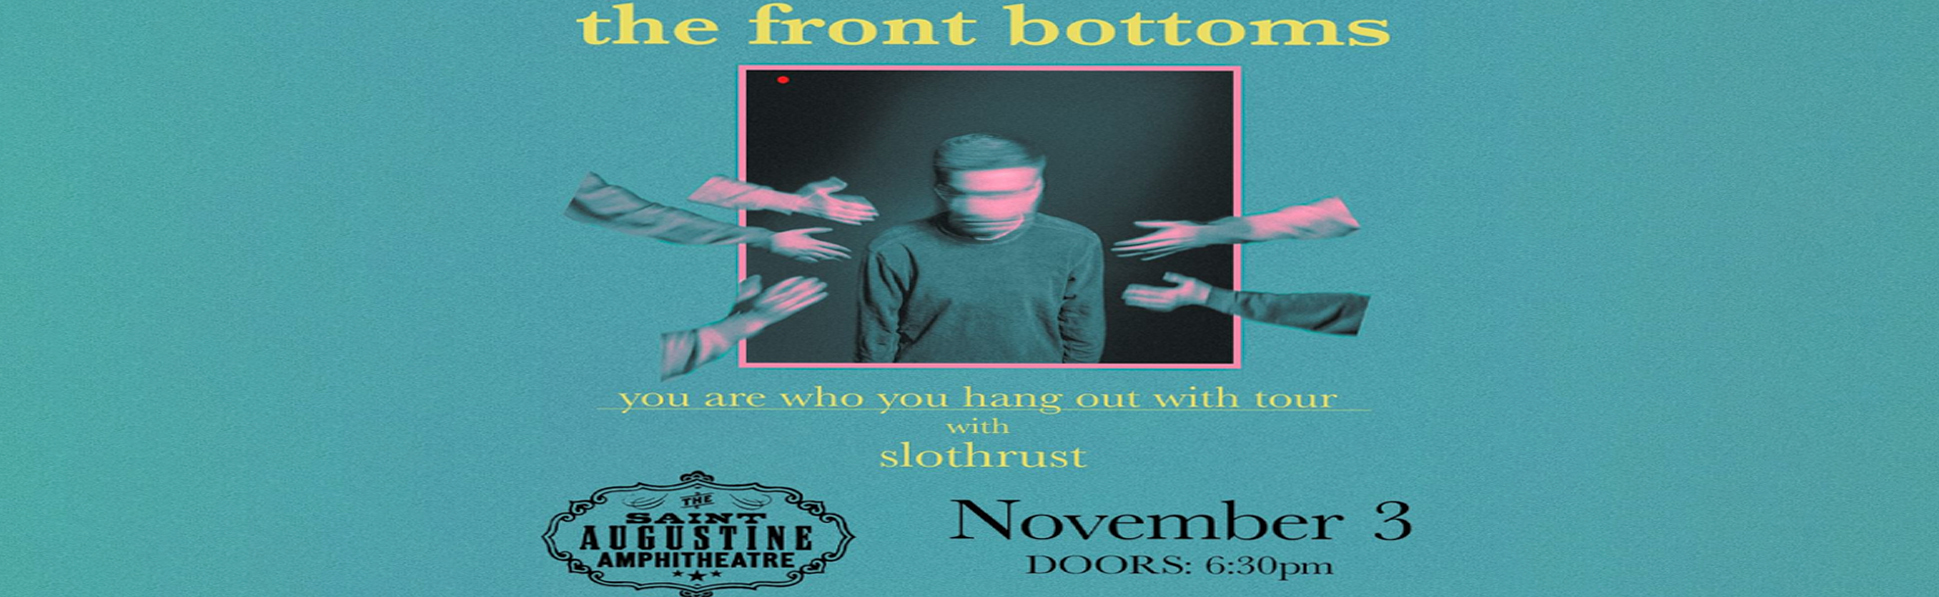 The Front Bottoms at St Augustine Amphitheatre